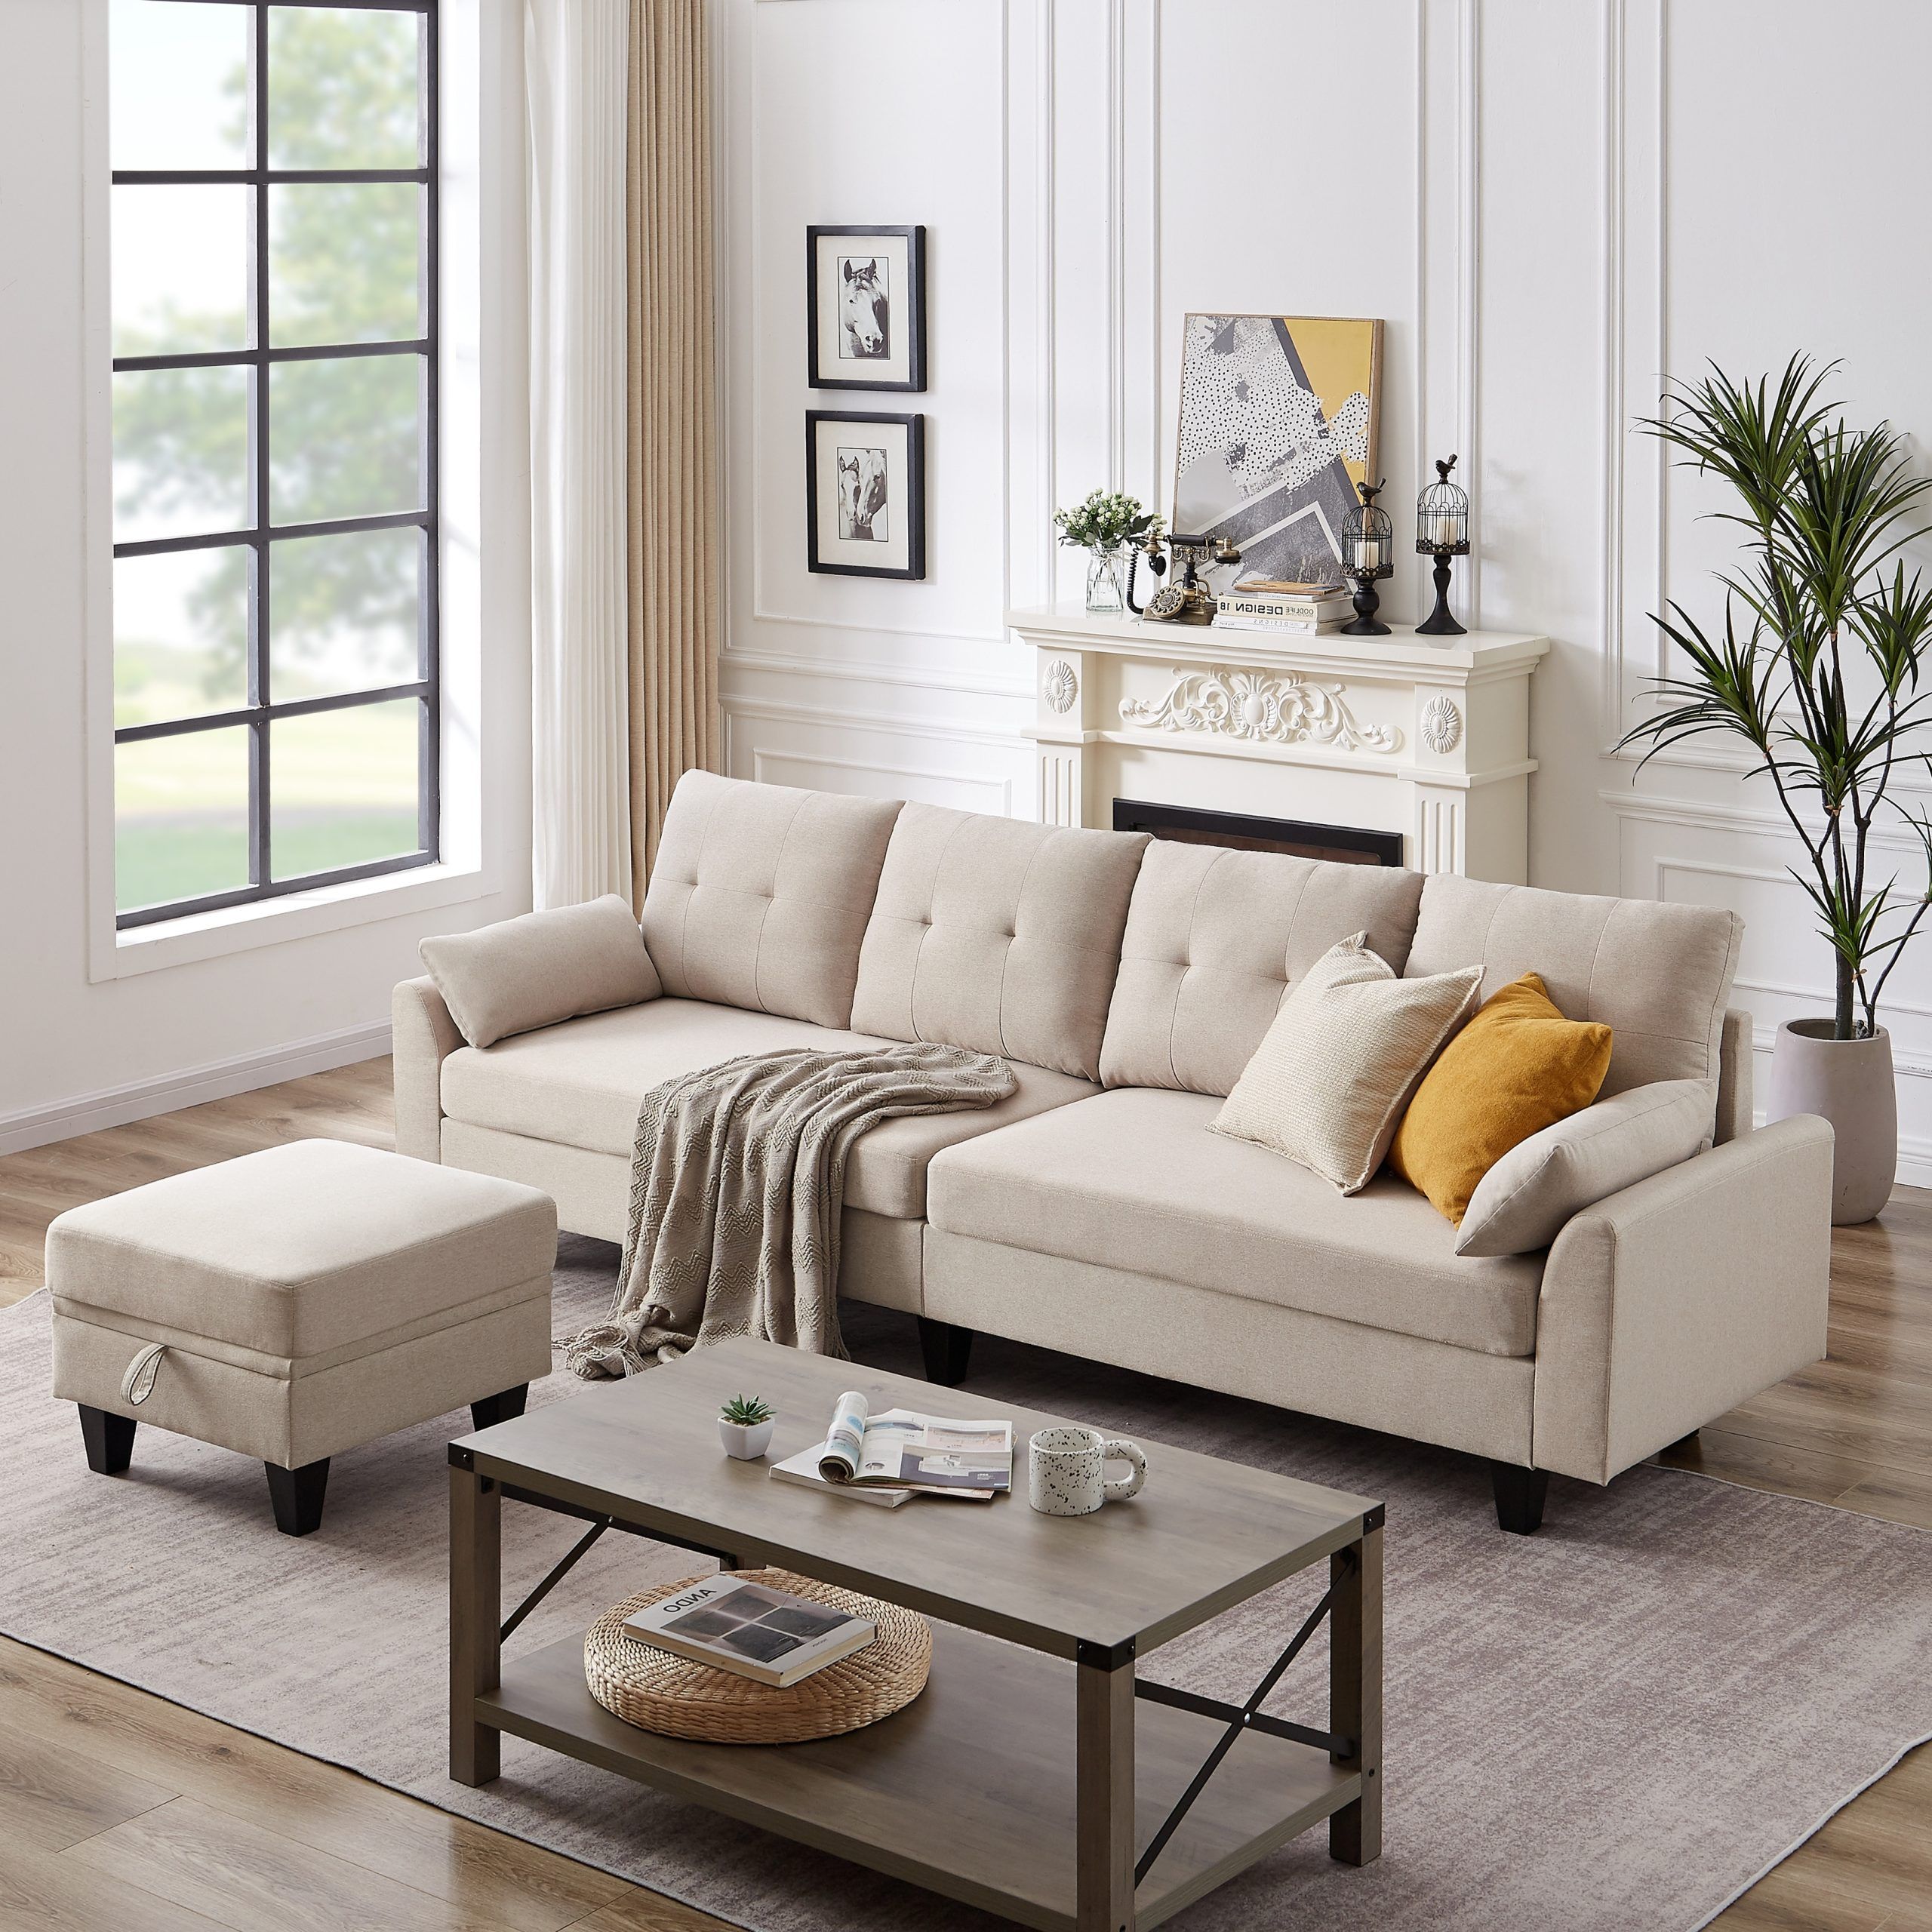 Modular Sectional Sofa Couch L Shaped With Chaise Storage Ottoman And Side  Bags For Living Room – On Sale – Bed Bath & Beyond – 36680252 Throughout Sofas With Ottomans (View 4 of 15)